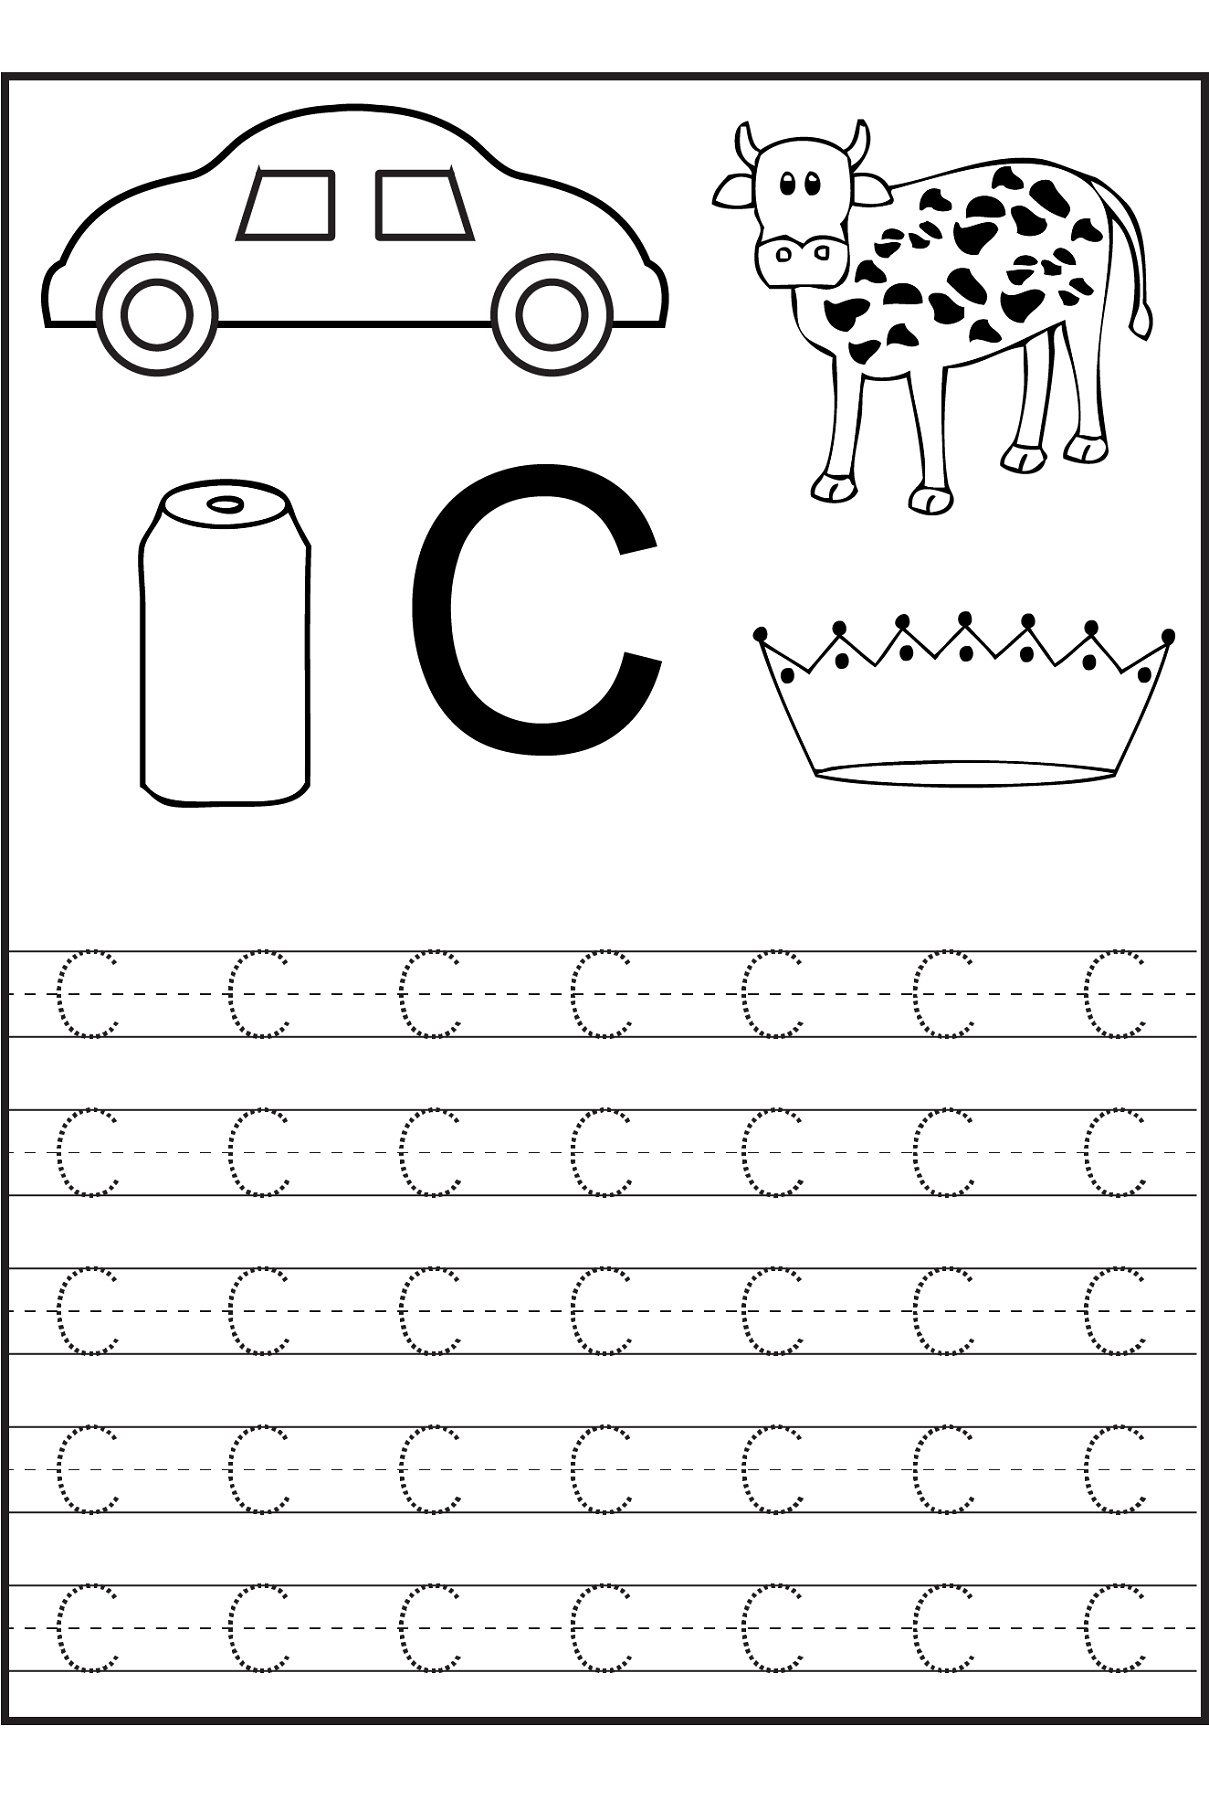 Trace The Letter C Worksheets | Learning Worksheets in Letter C Worksheets For Grade 1